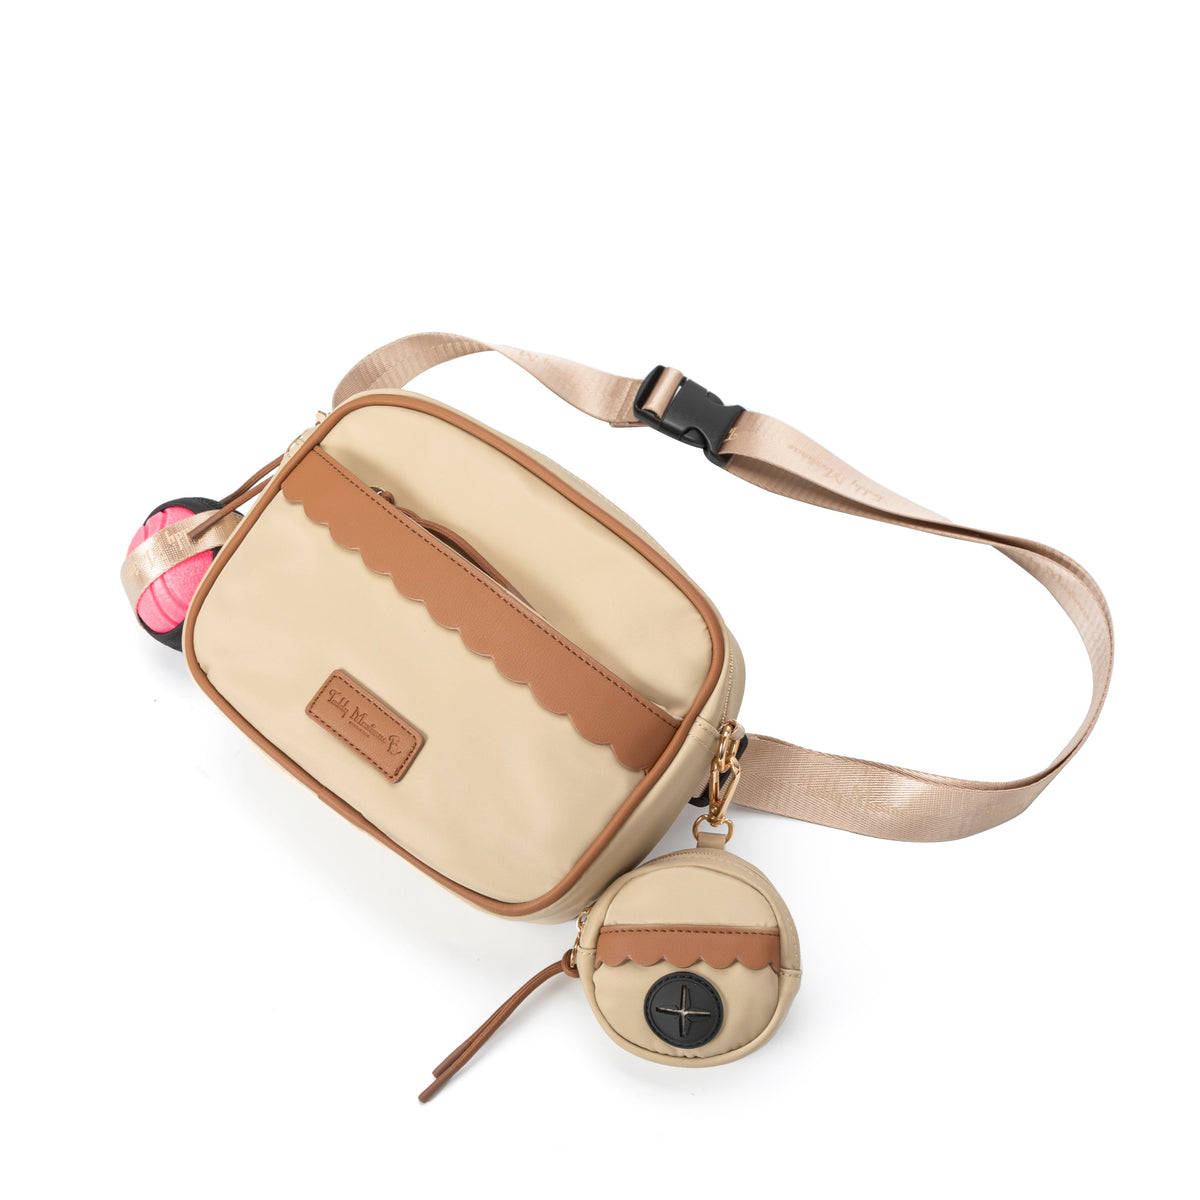 NEW! 'The Richmond' Taupe Luxury Dog Walking Bag